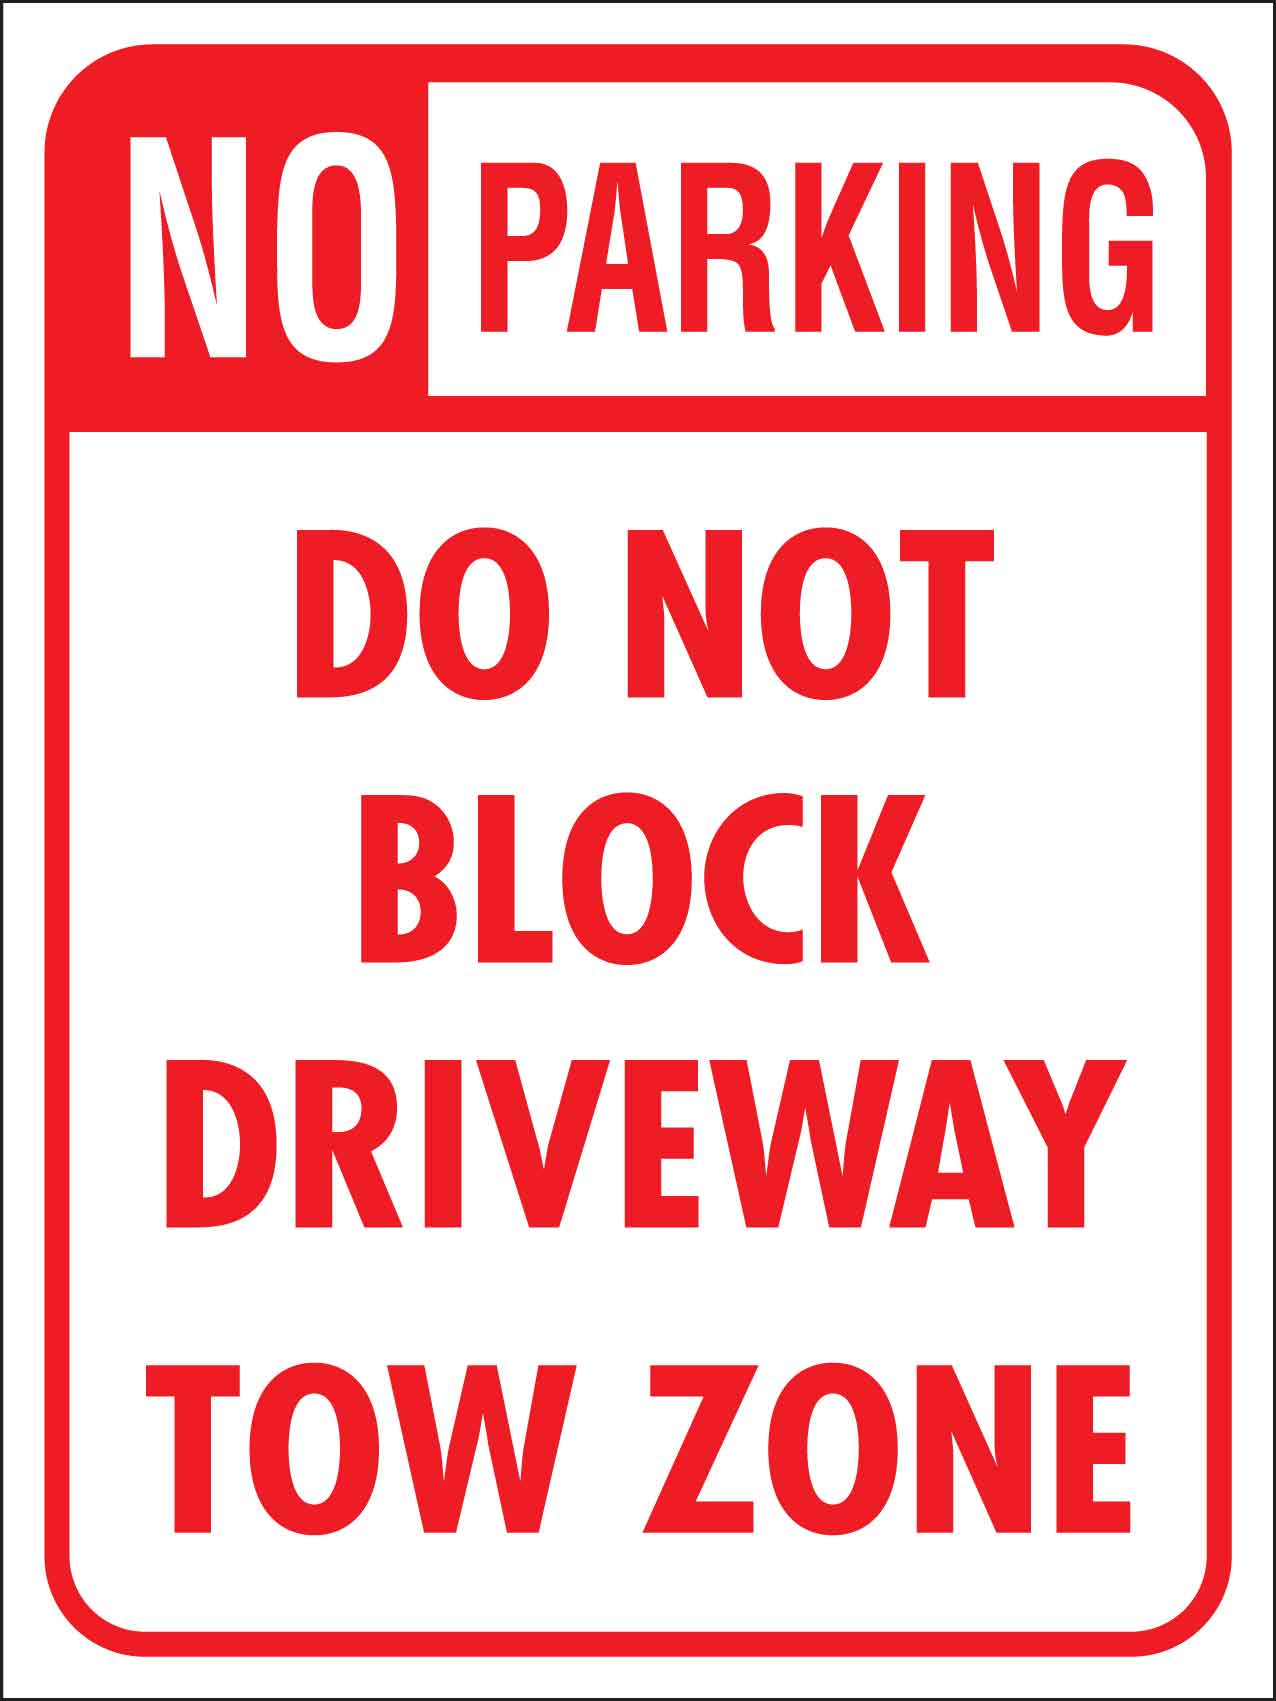 No Parking Do Not Block Driveway Tow Zone Sign